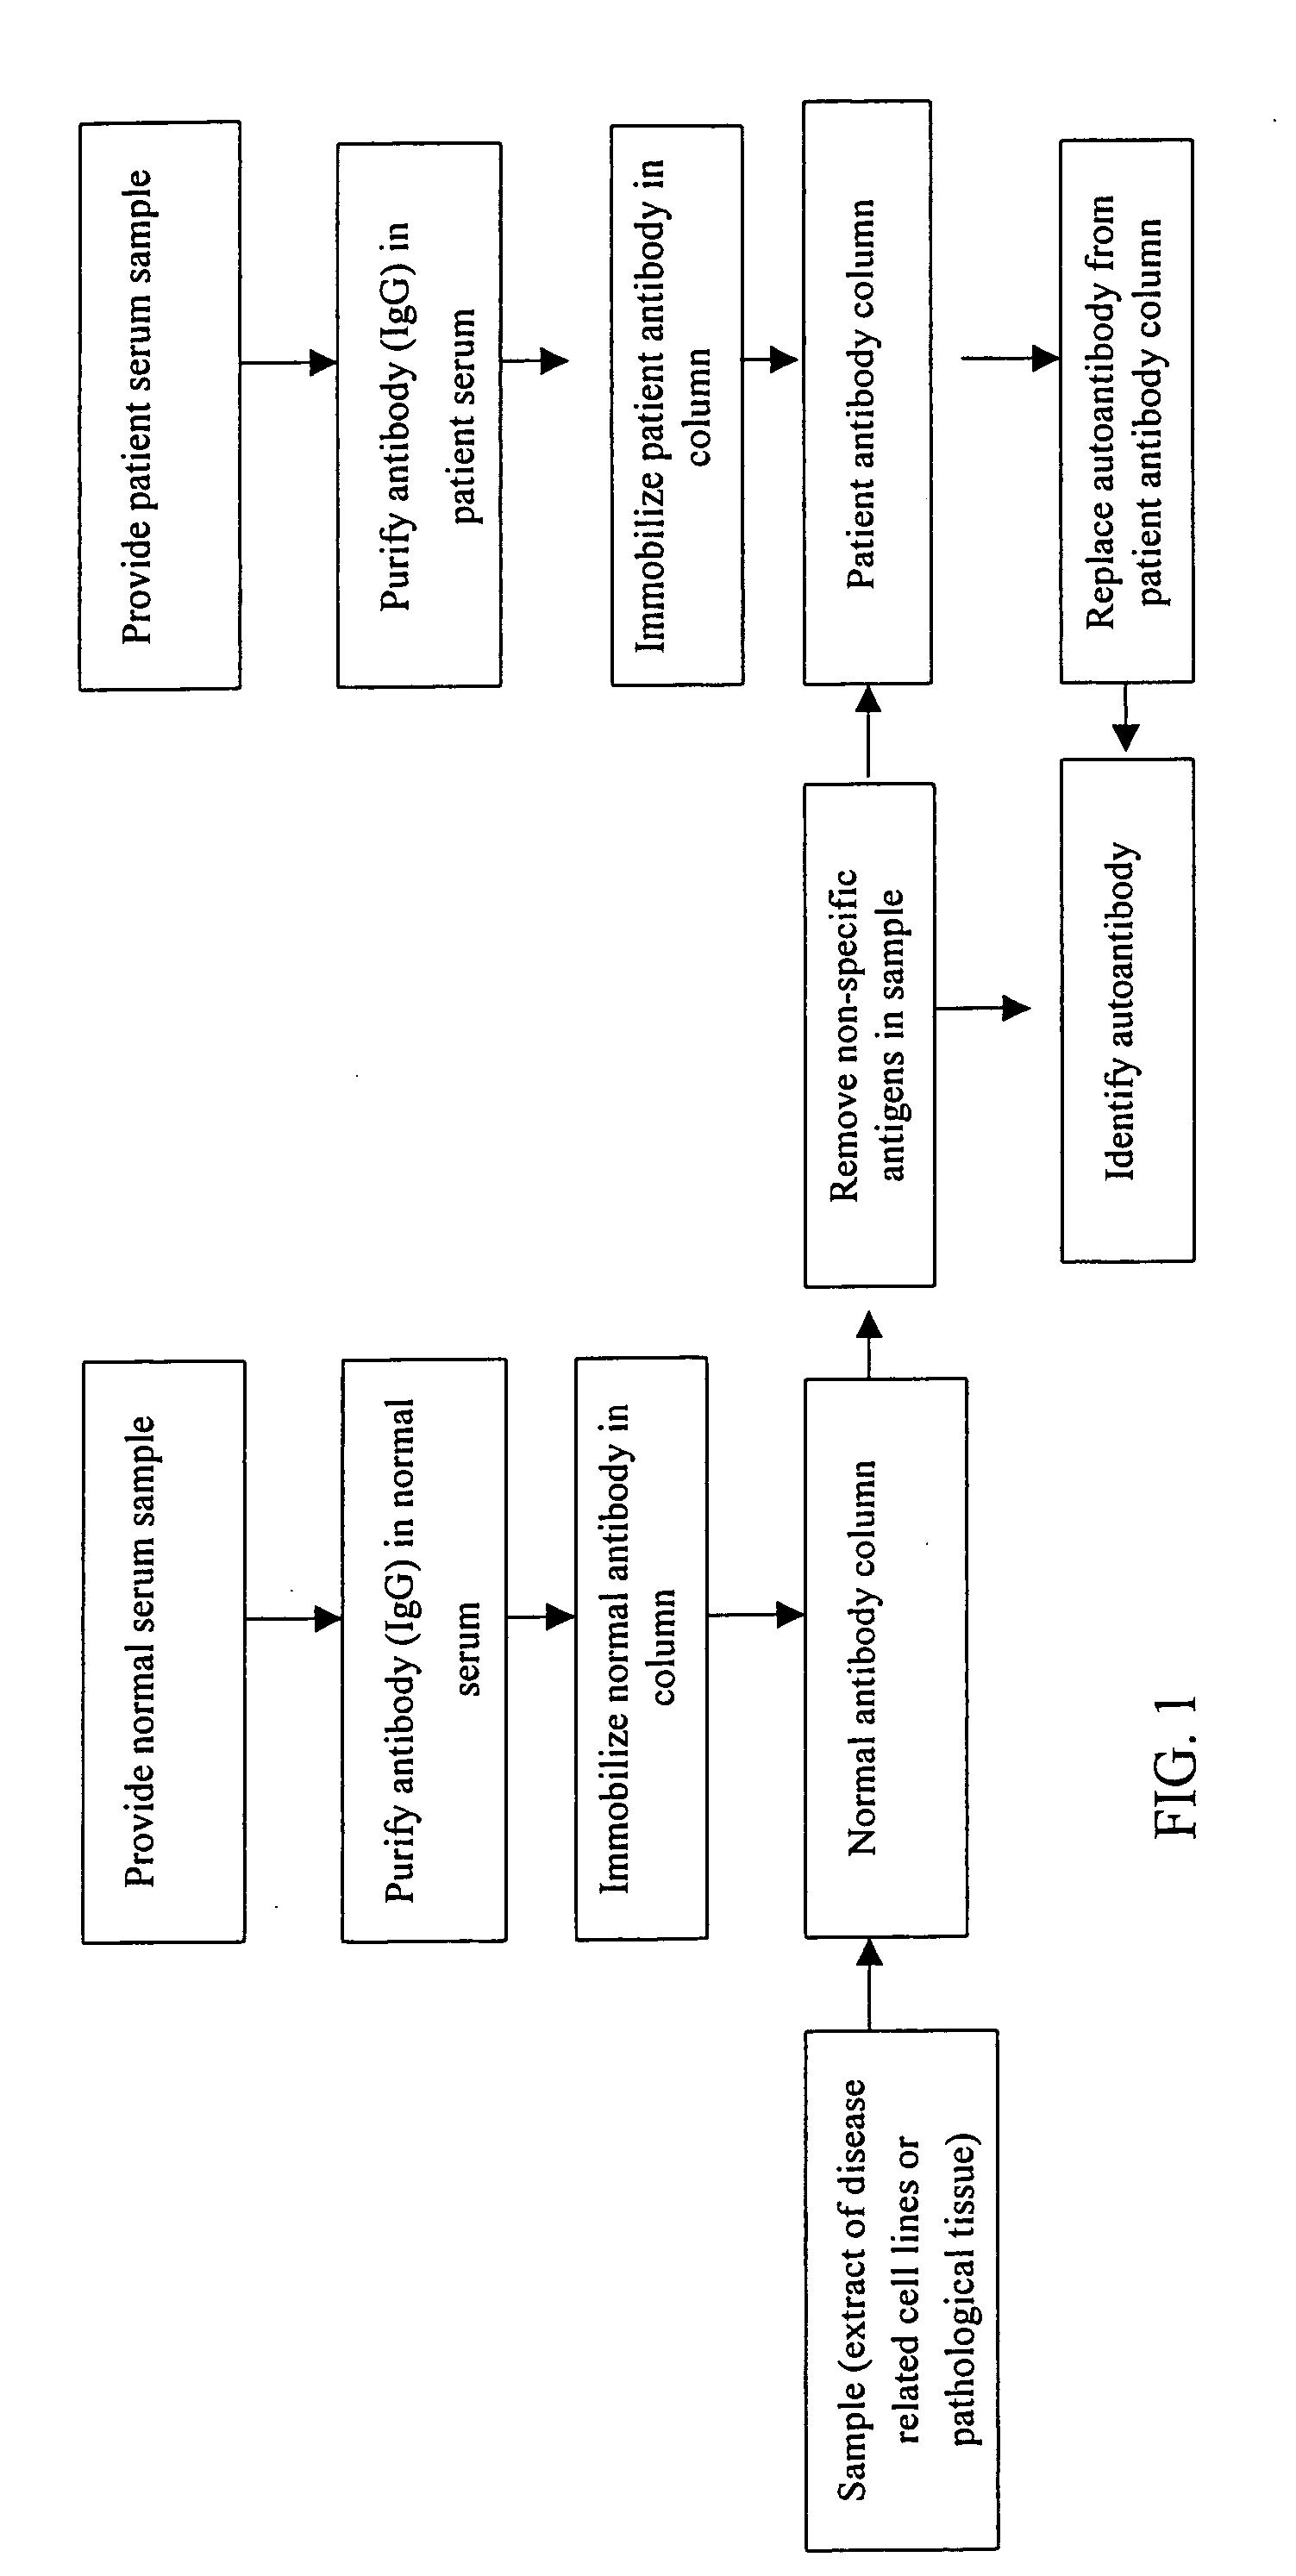 Biomarkers for liver diseases and method for using the same